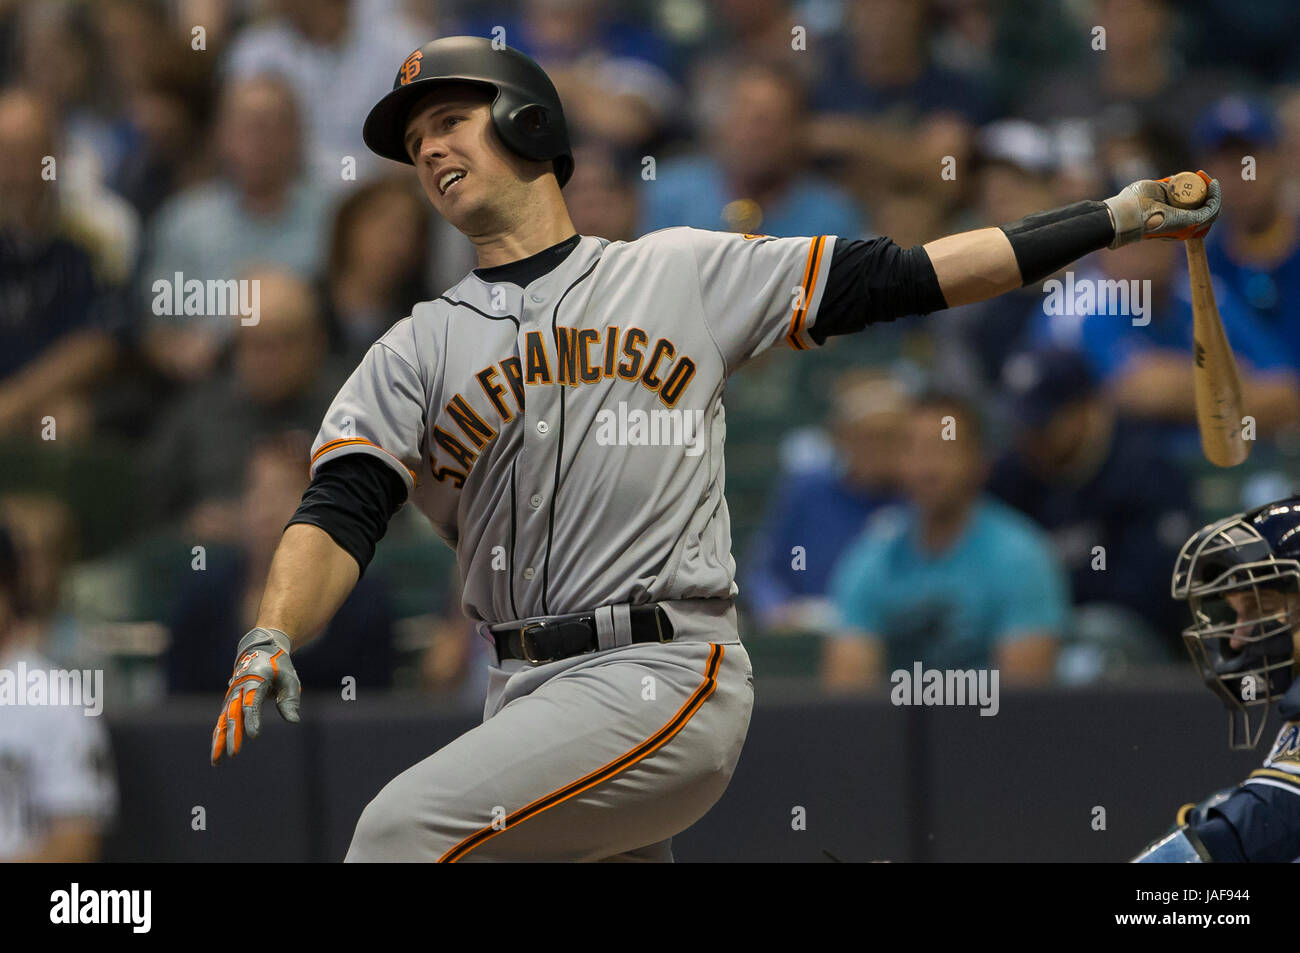 Milwaukee, WI, USA. 6th June, 2017. San Francisco Giants catcher Buster Posey #28 reacts after missing on the pitch in the Major League Baseball game between the Milwaukee Brewers and the San Francisco Giants at Miller Park in Milwaukee, WI. John Fisher/CSM/Alamy Live News Stock Photo